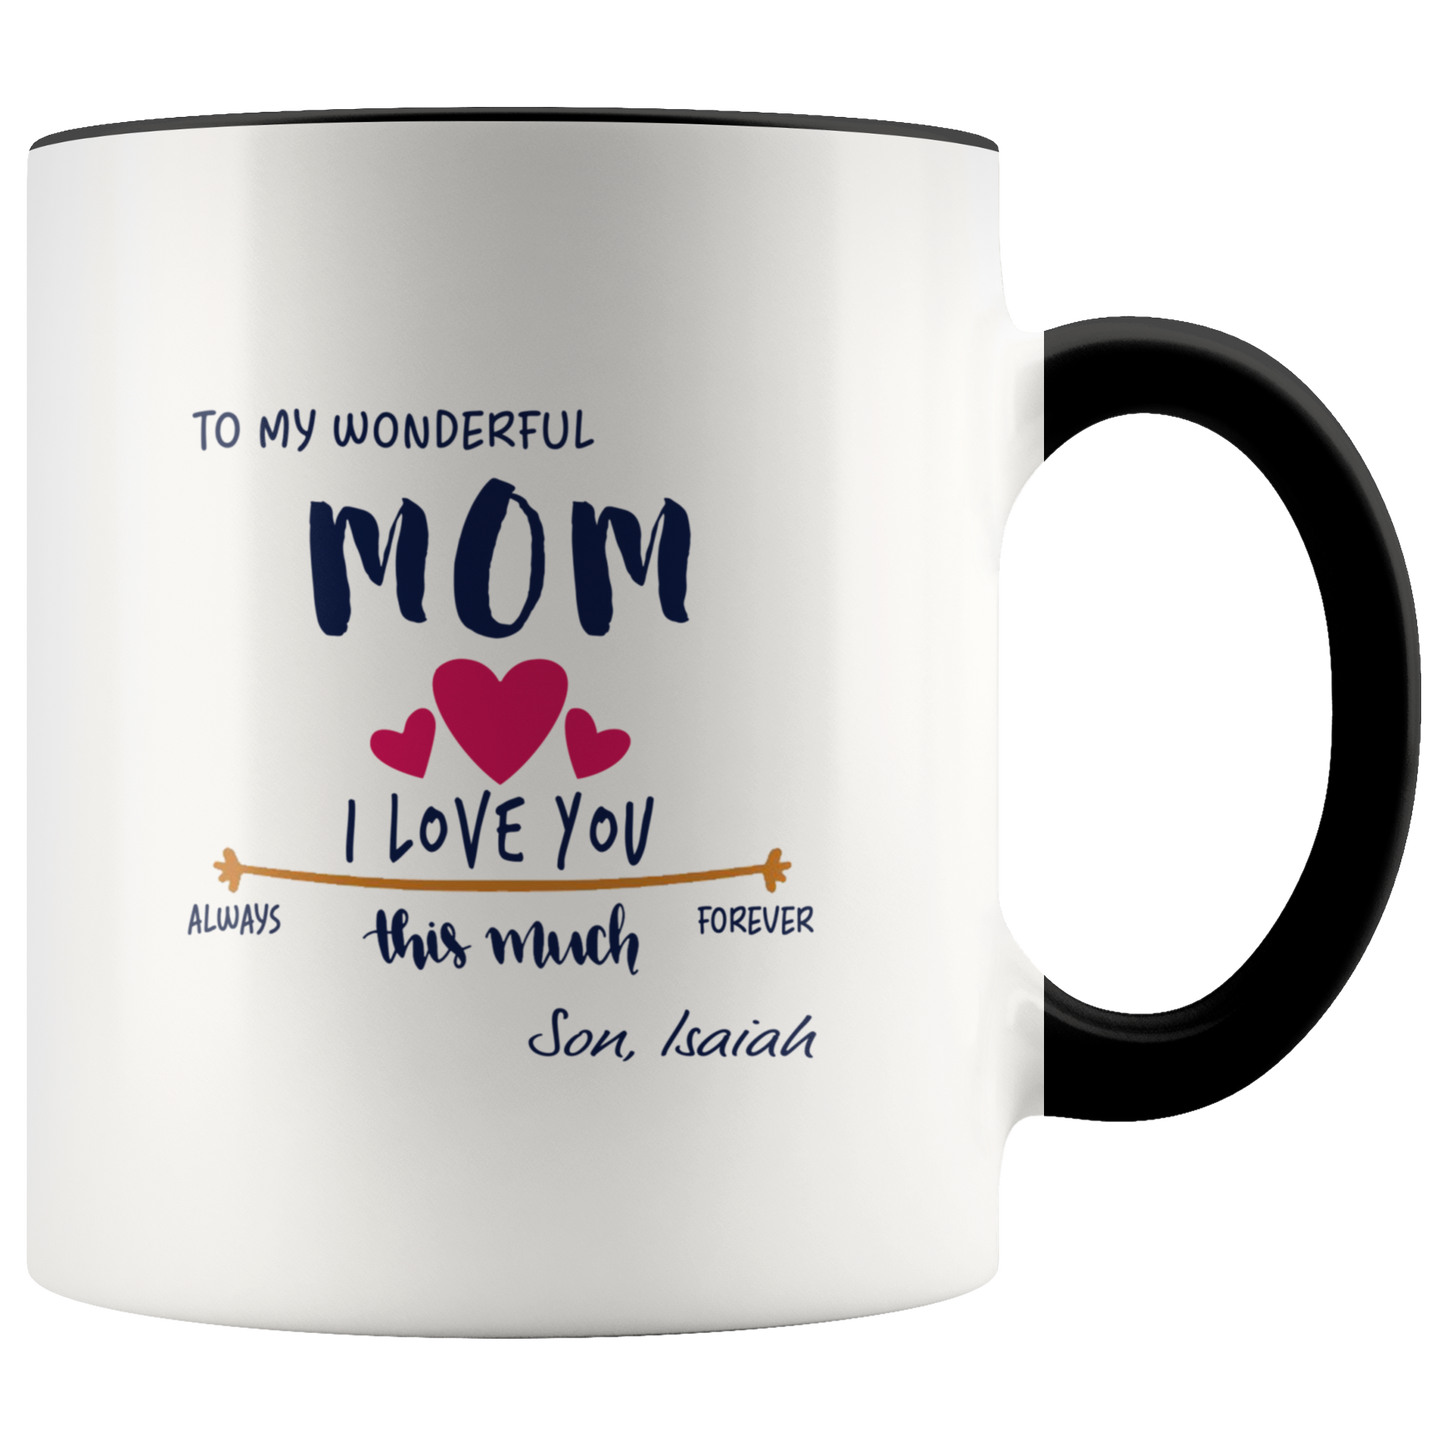 M-21404828-sp-23811 - [ Isaiah | 1 | 1 ]Mother Day Gifts From Son Isaiah - To My Wonderful Mom I Lov